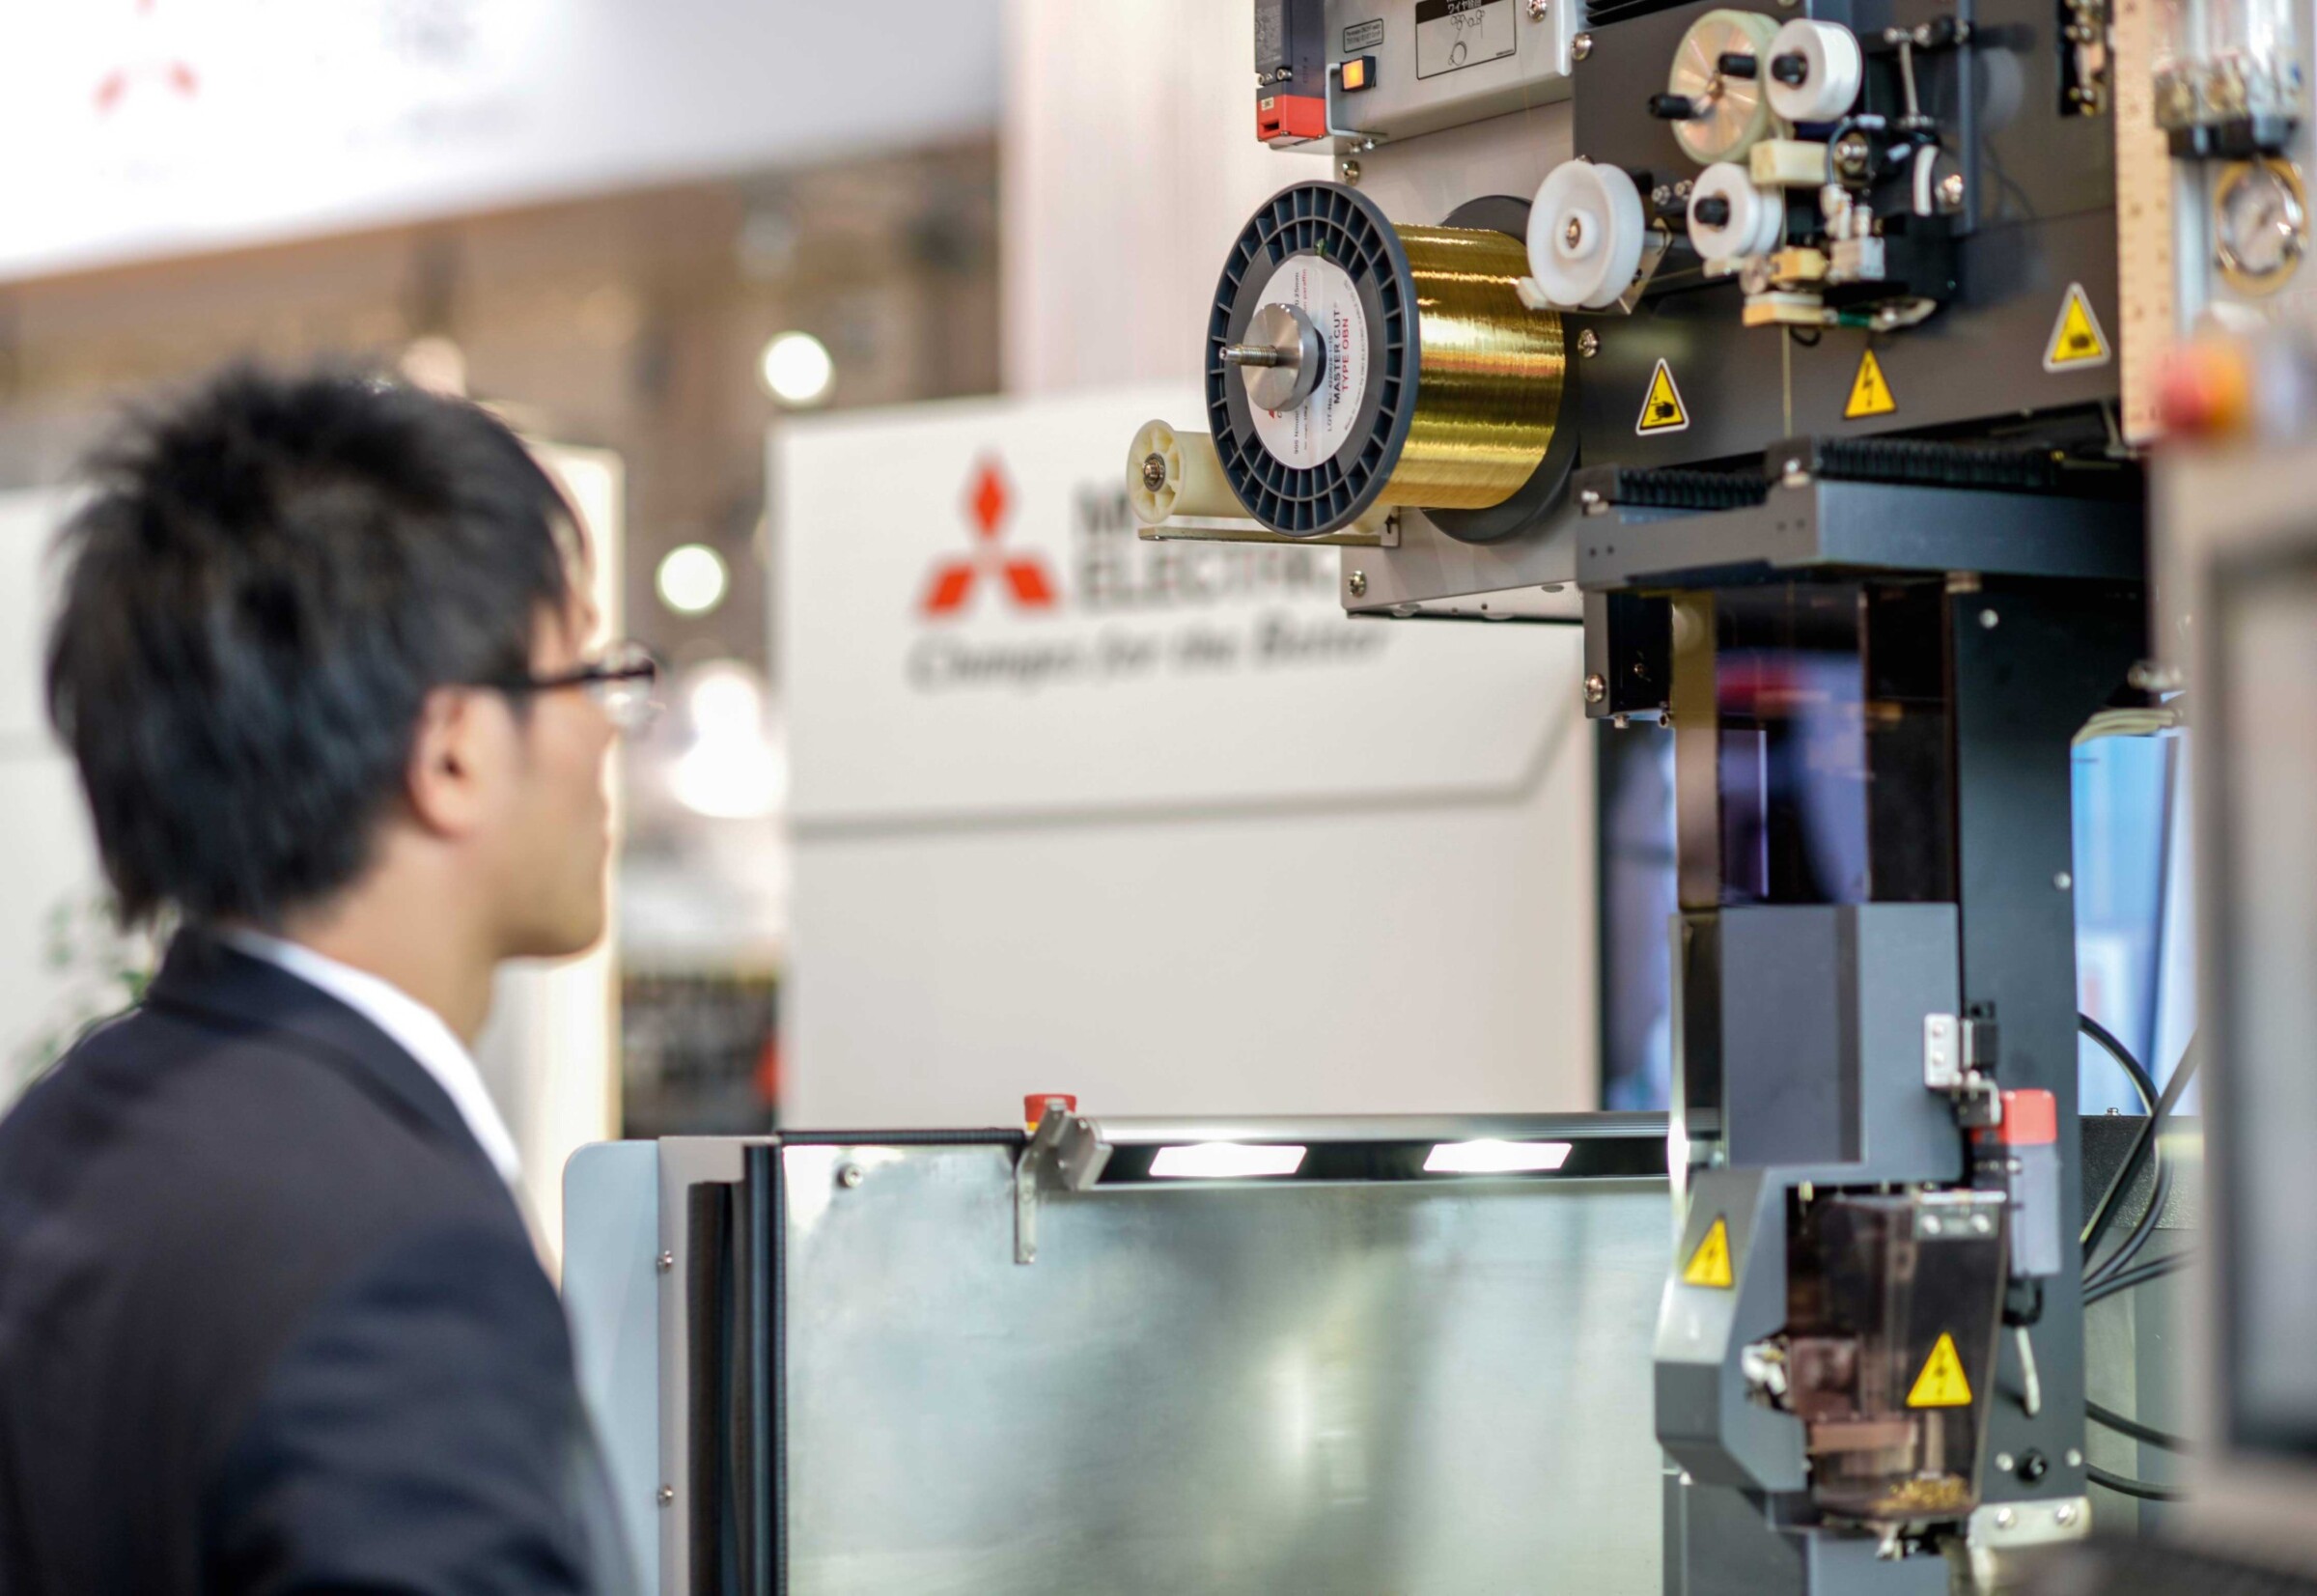 At the Mitsubishi Electric fair stand, there were live ­demonstrations of many technical innovations.